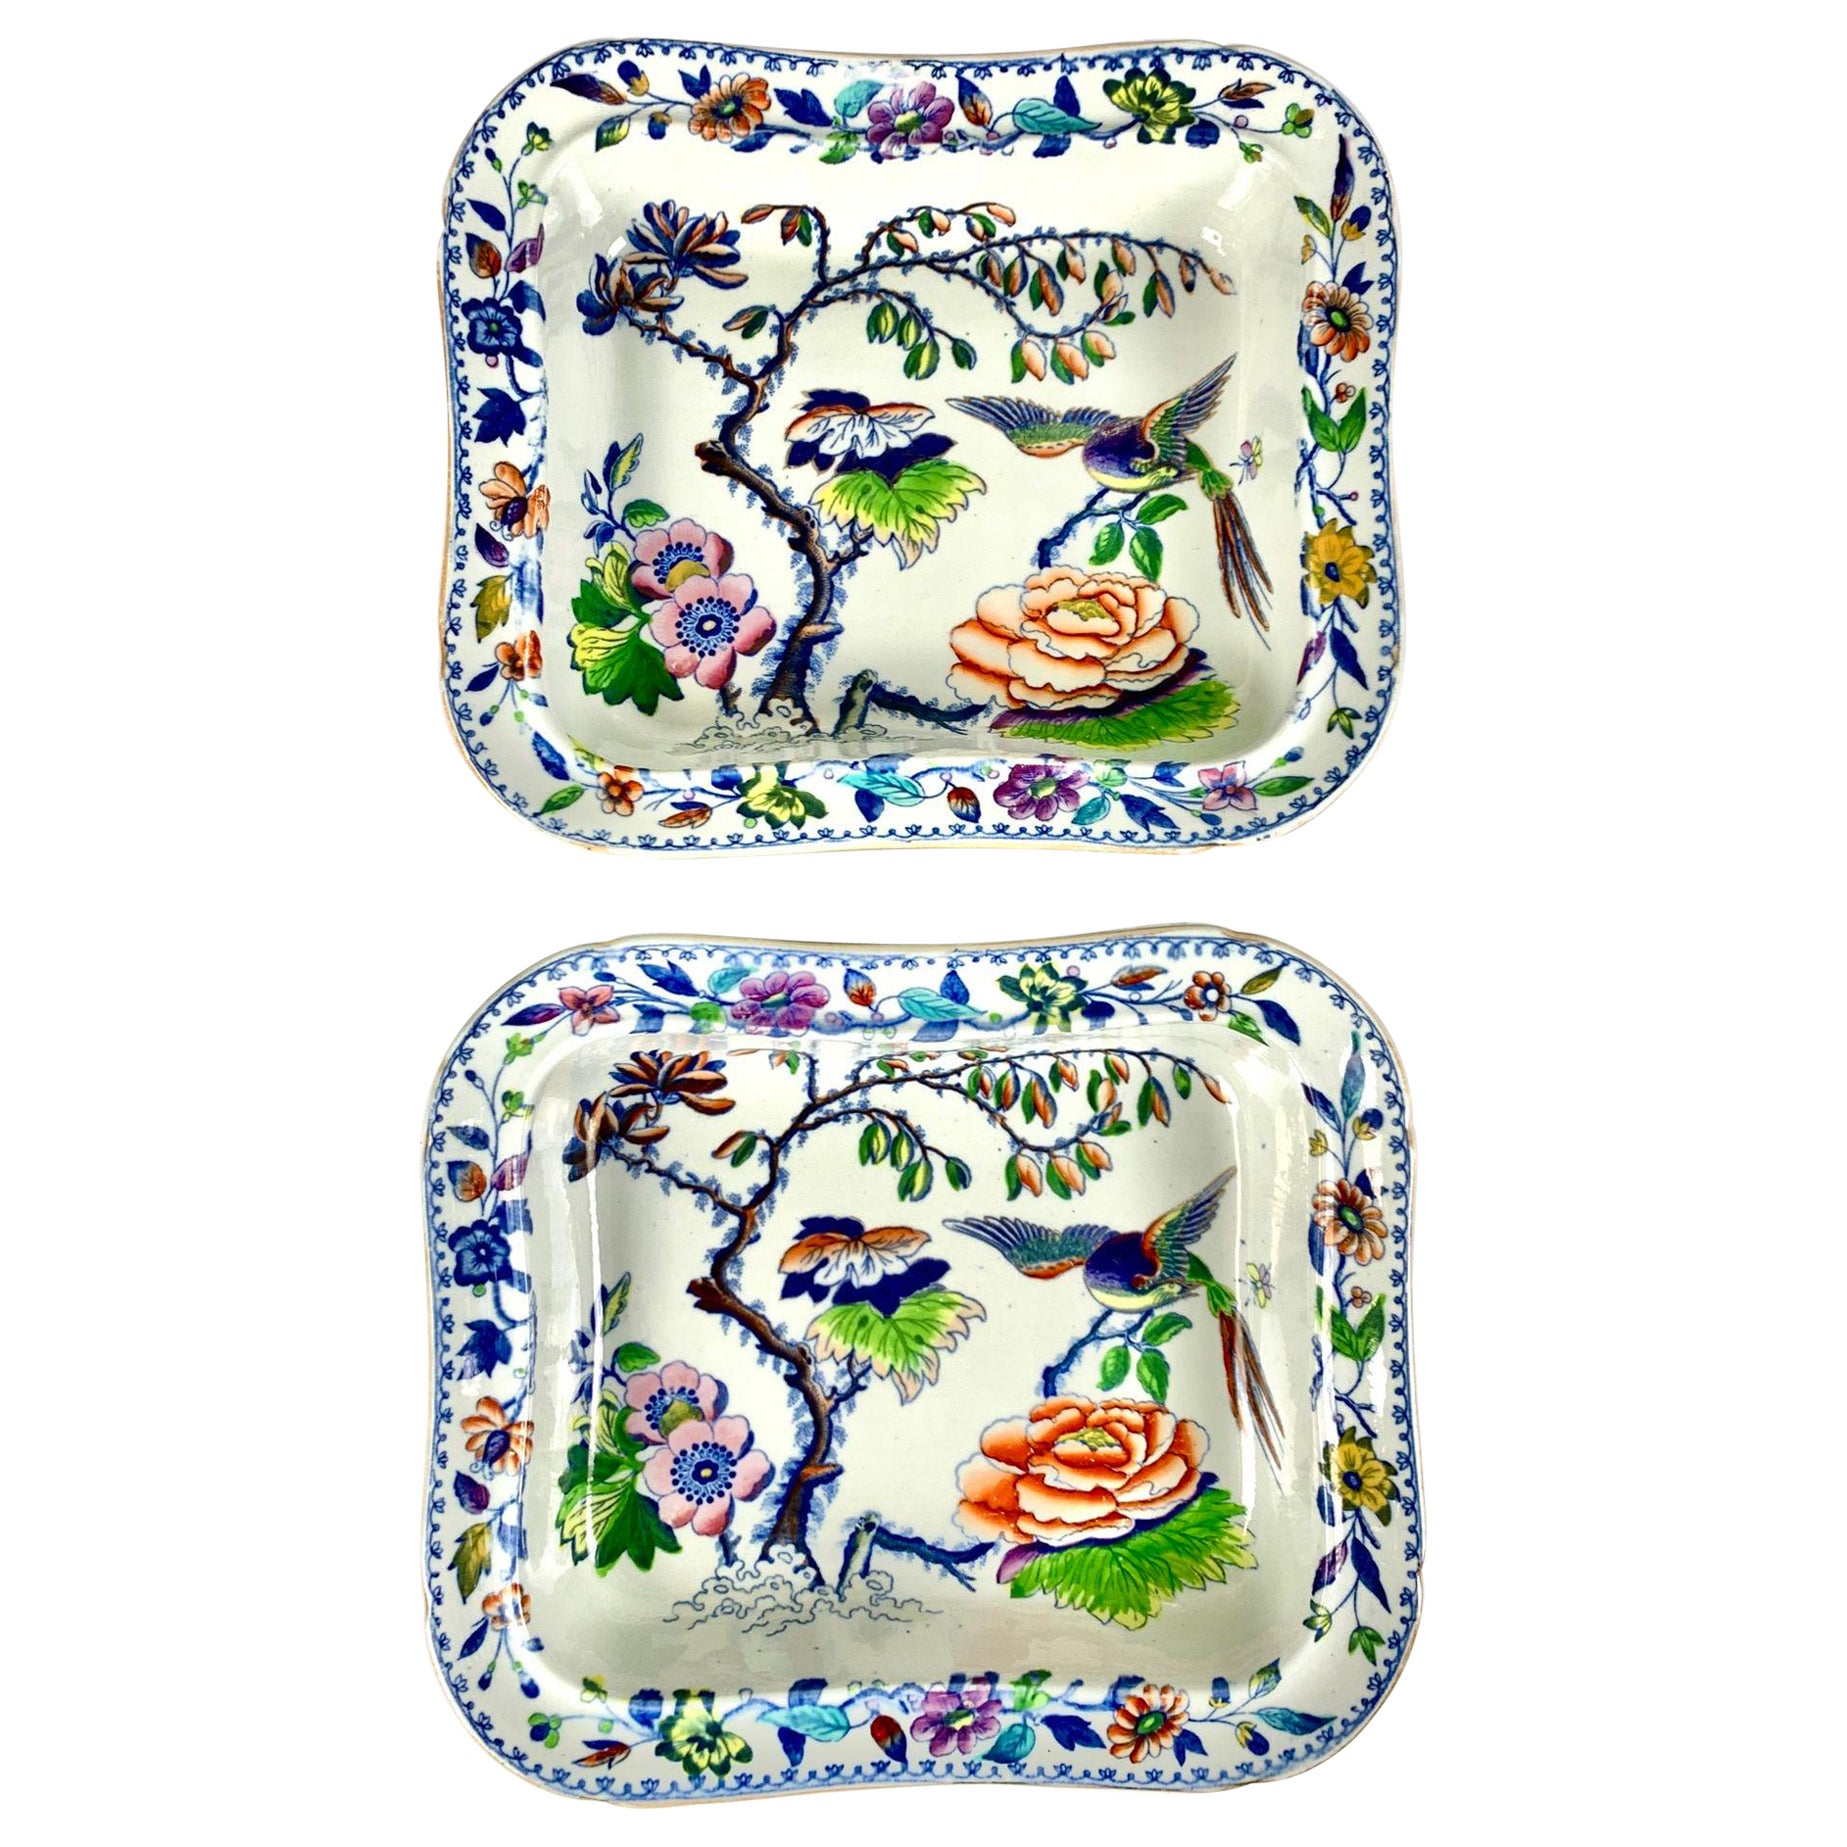 Pair of Flying Bird Dishes Made by Davenport England Circa 1840